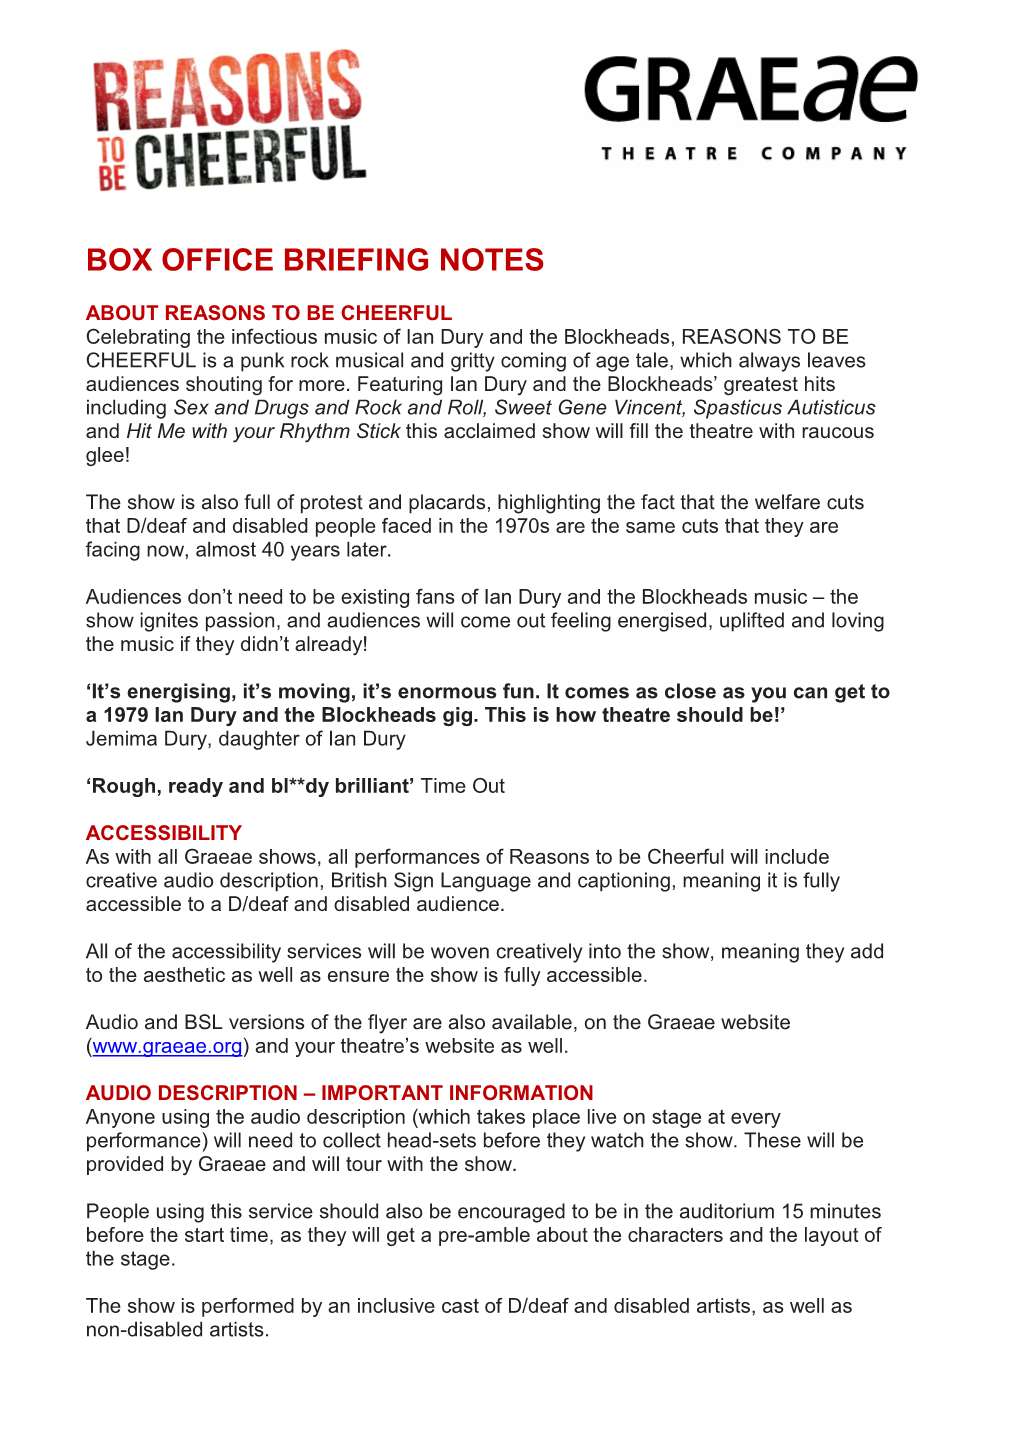 Box Office Briefing Notes